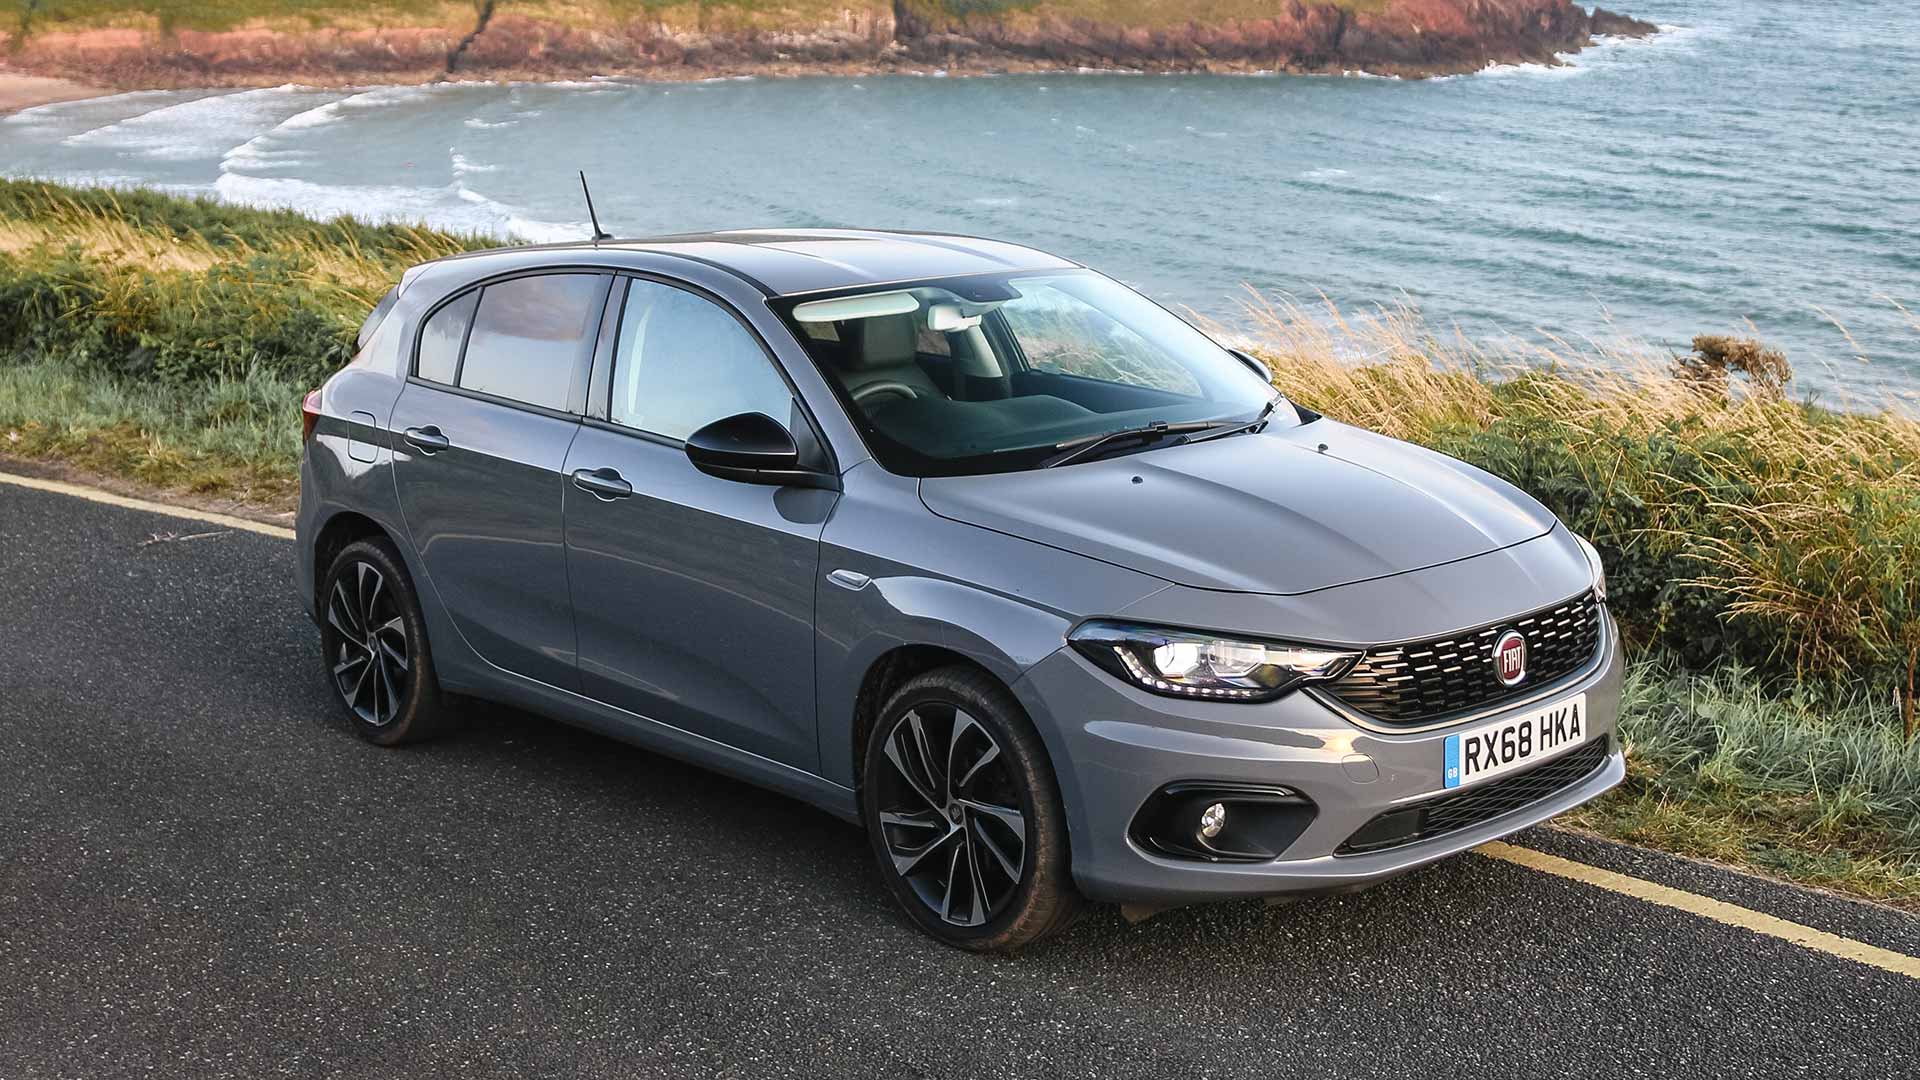 Fiat Tipo review - Motoring Research